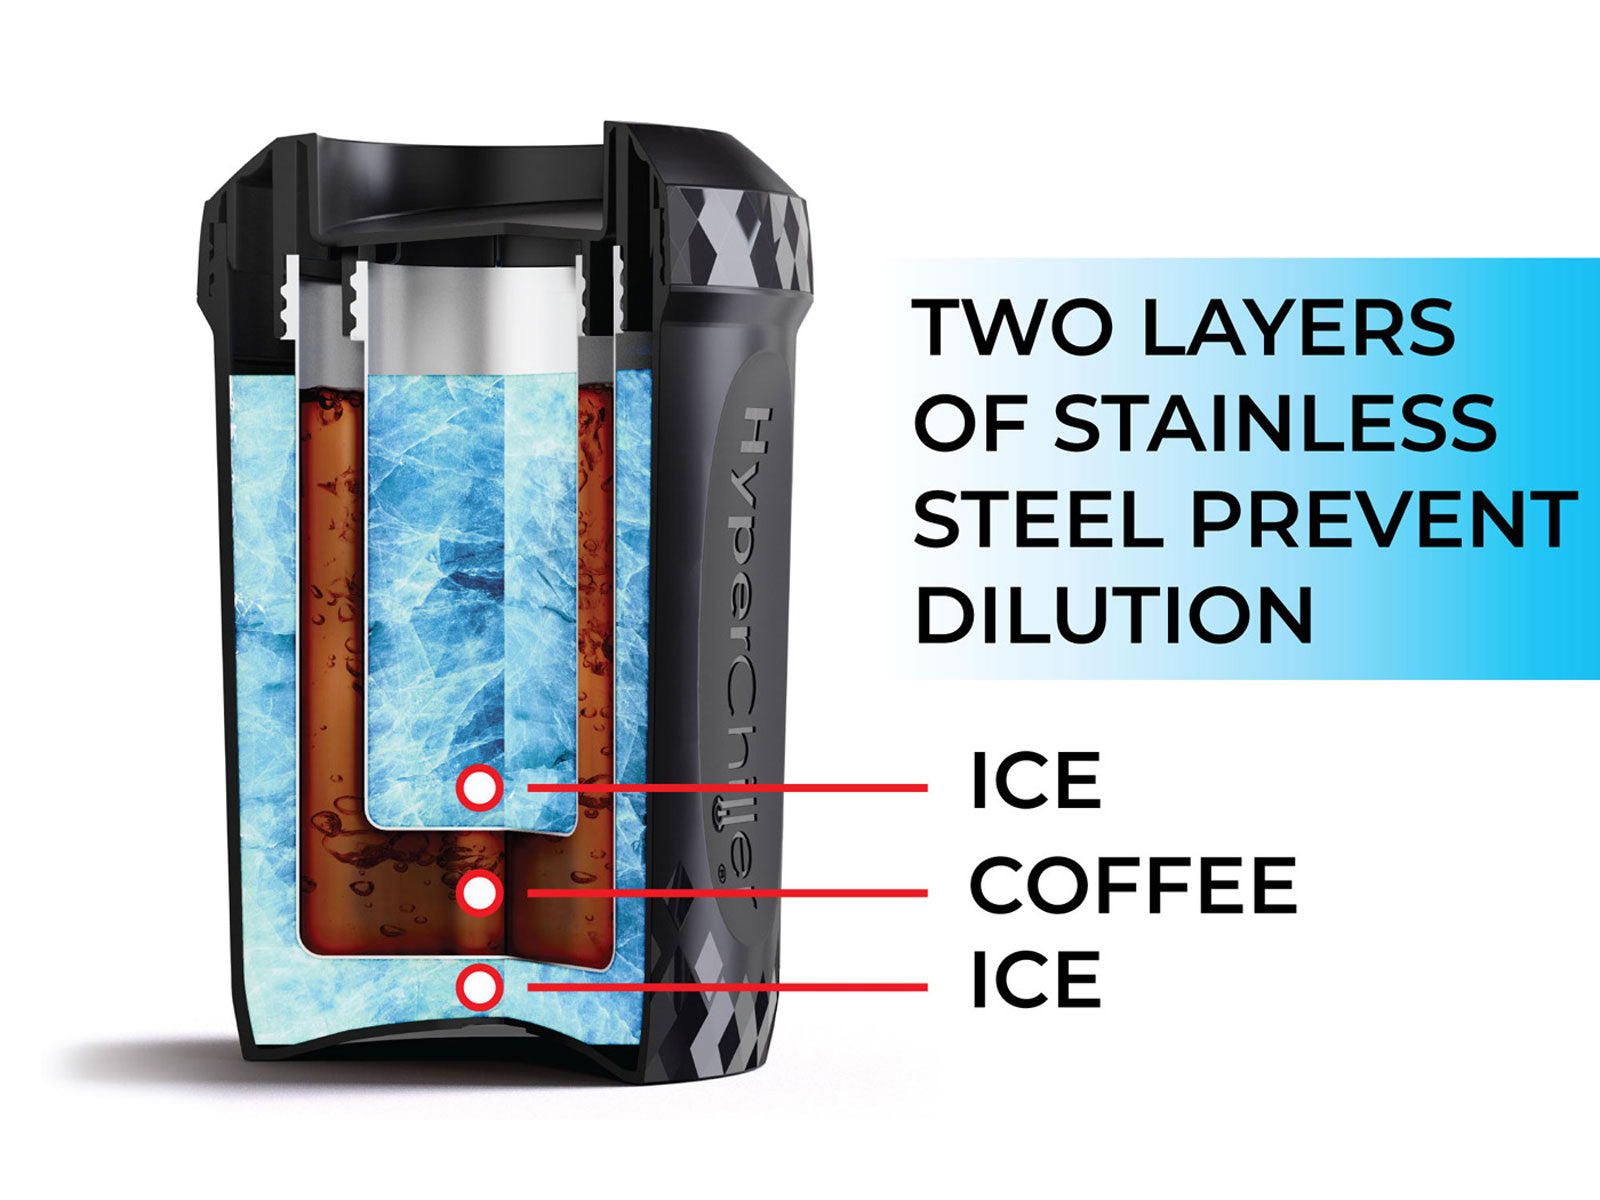 The HyperChiller makes iced coffee in less than a minute - Boing Boing